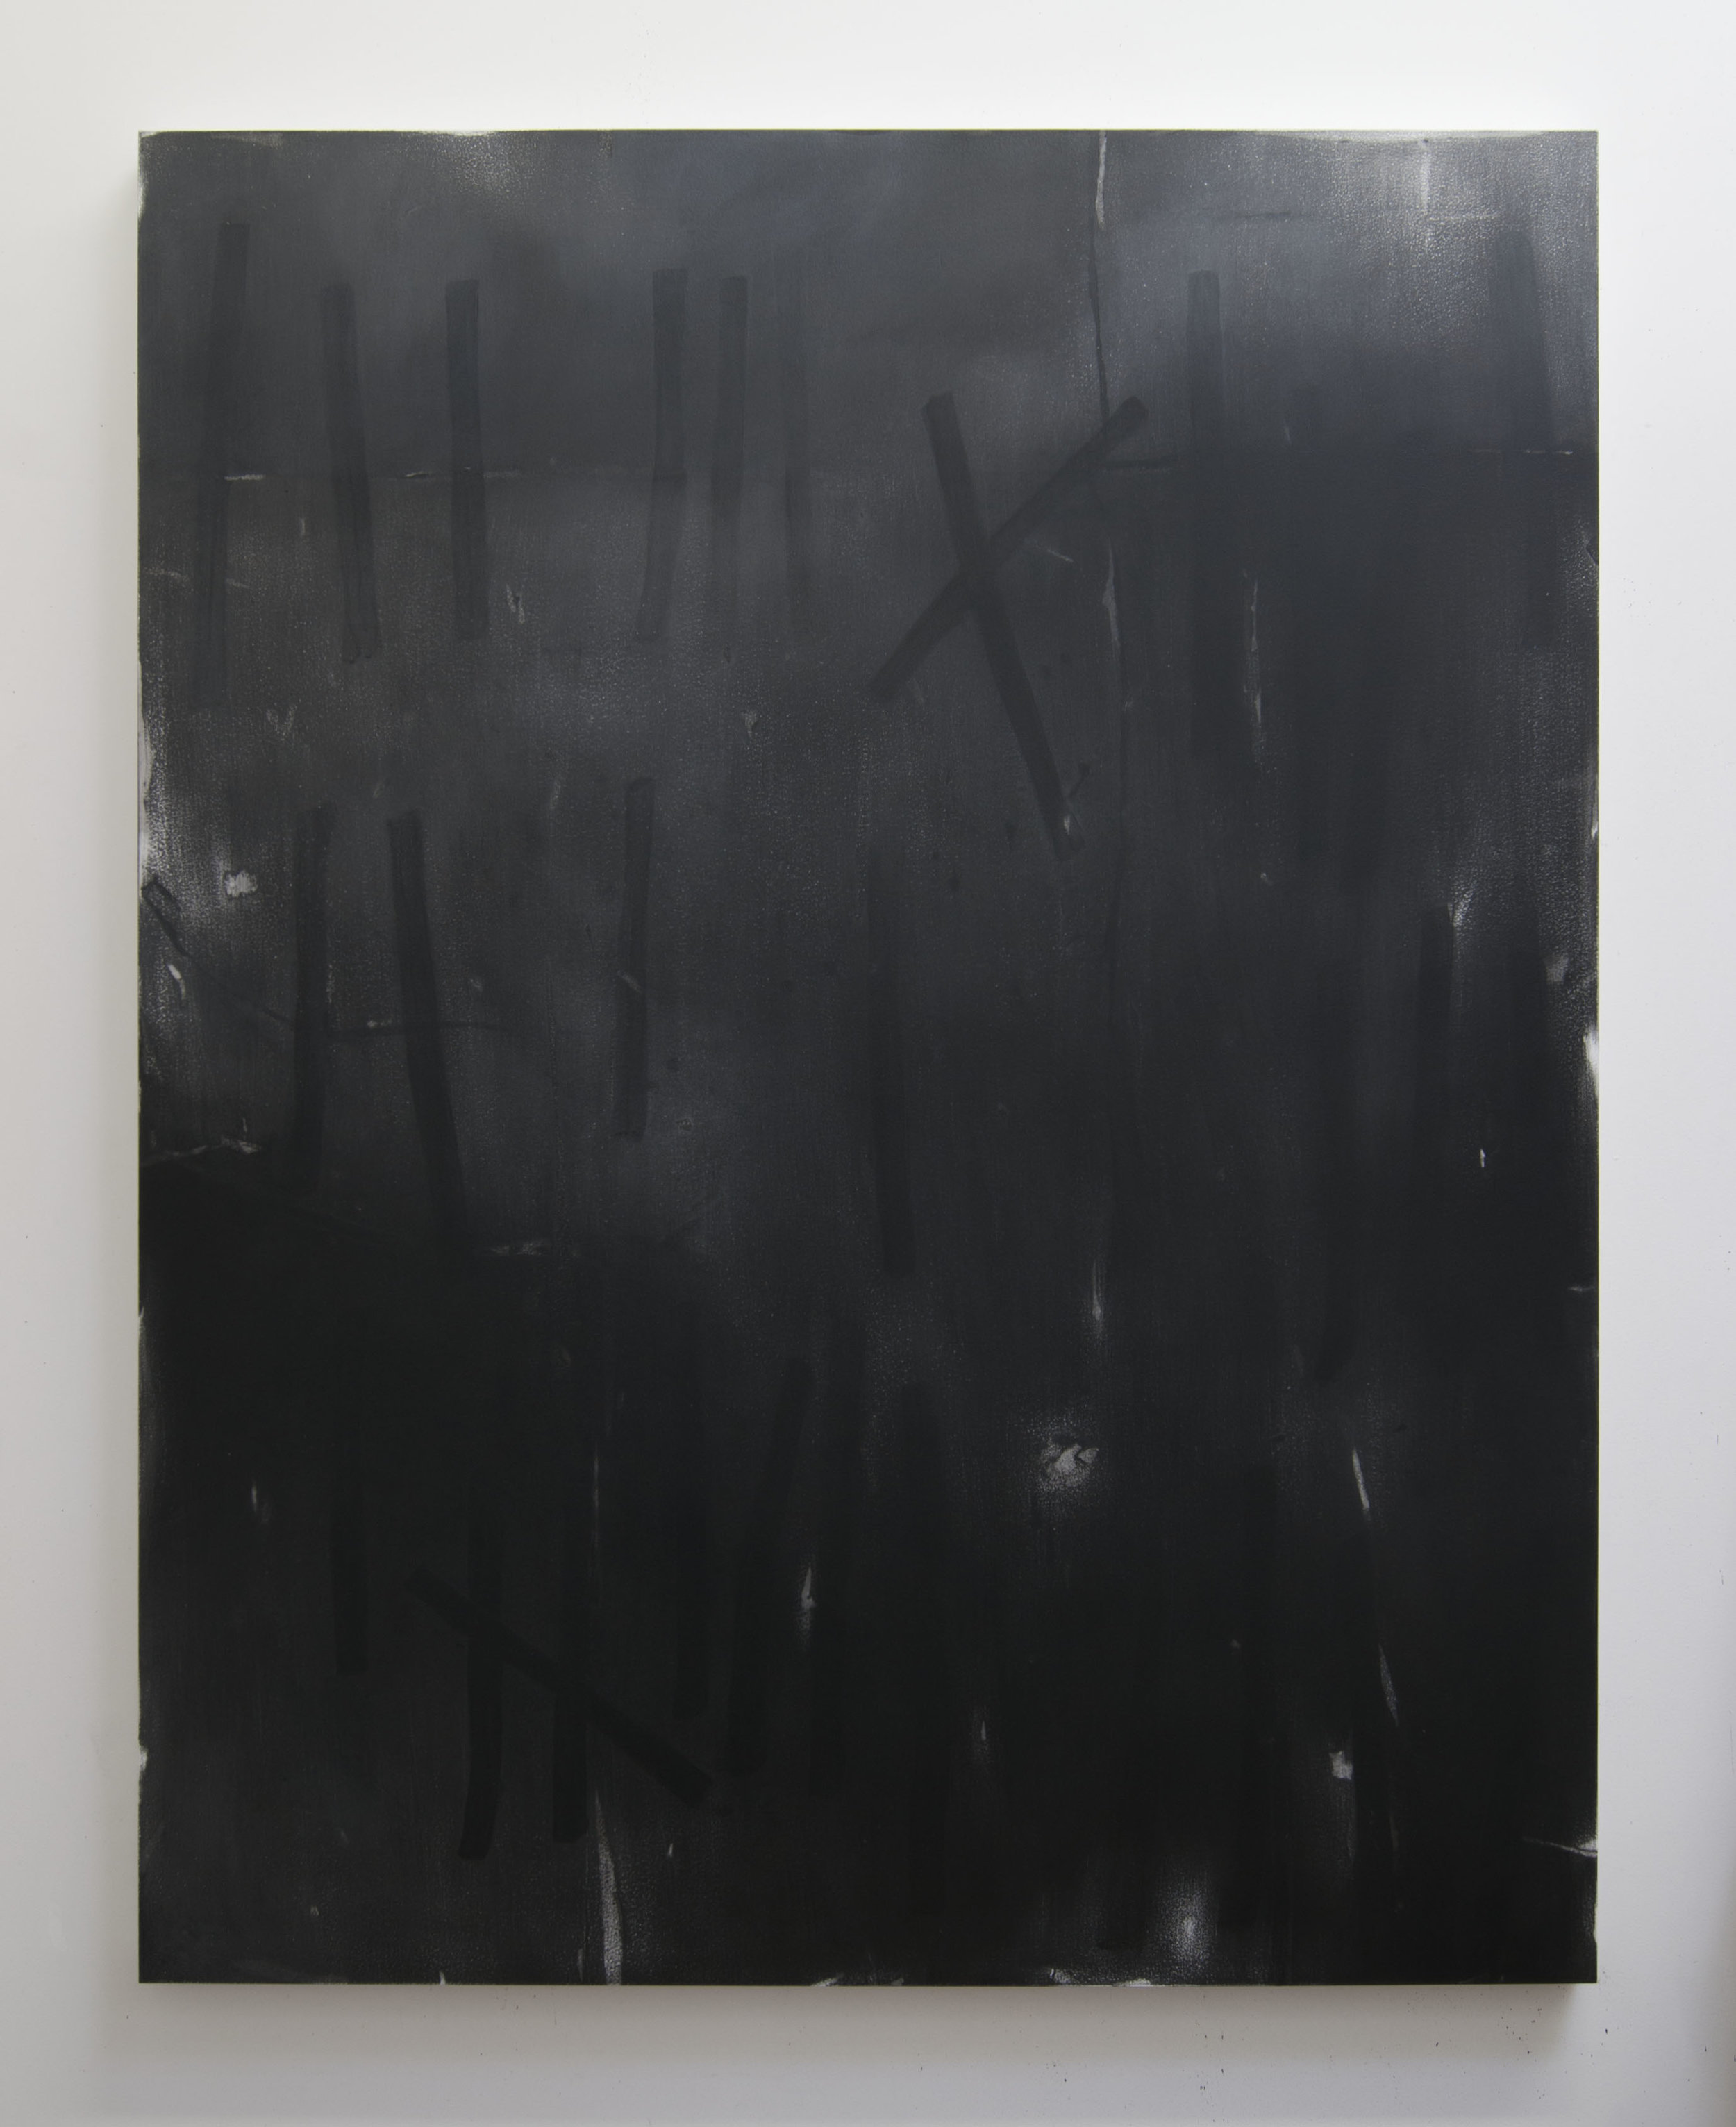  Long Gone, 2015  Acrylic on panel, 56 x 44 inches 